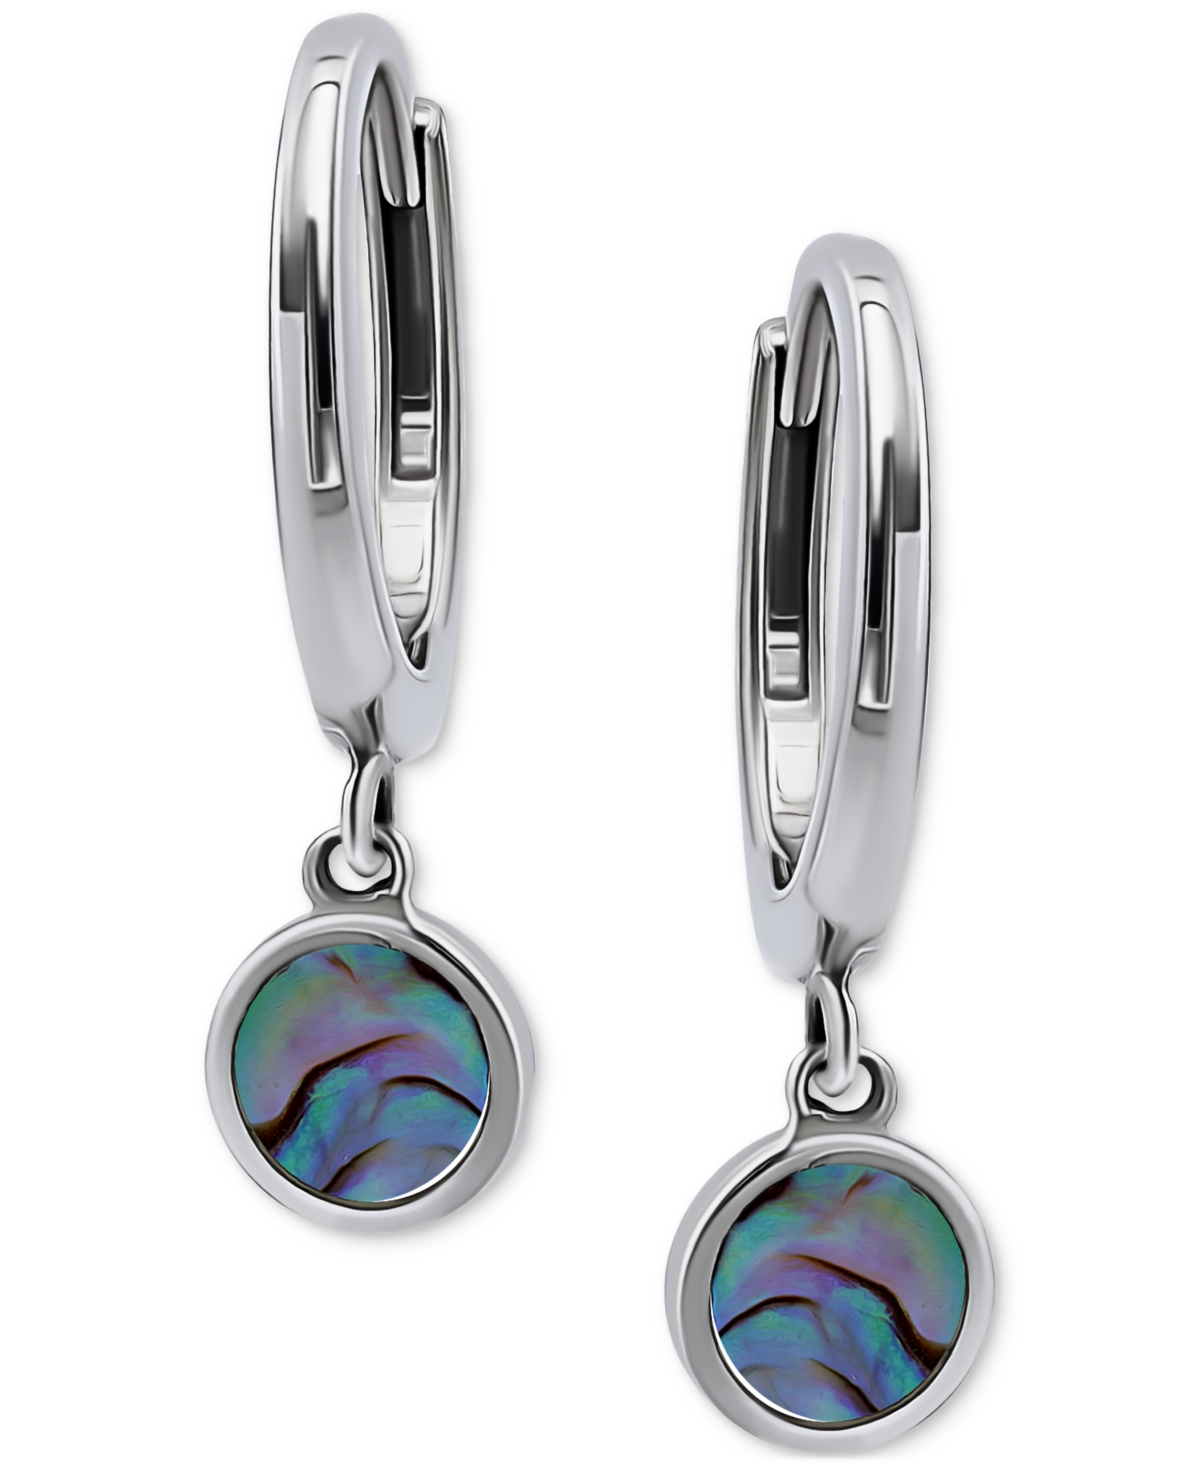 Abalone Disc Dangle Hoop Drop Earrings in Sterling Silver, Created for Macy's - Abalone